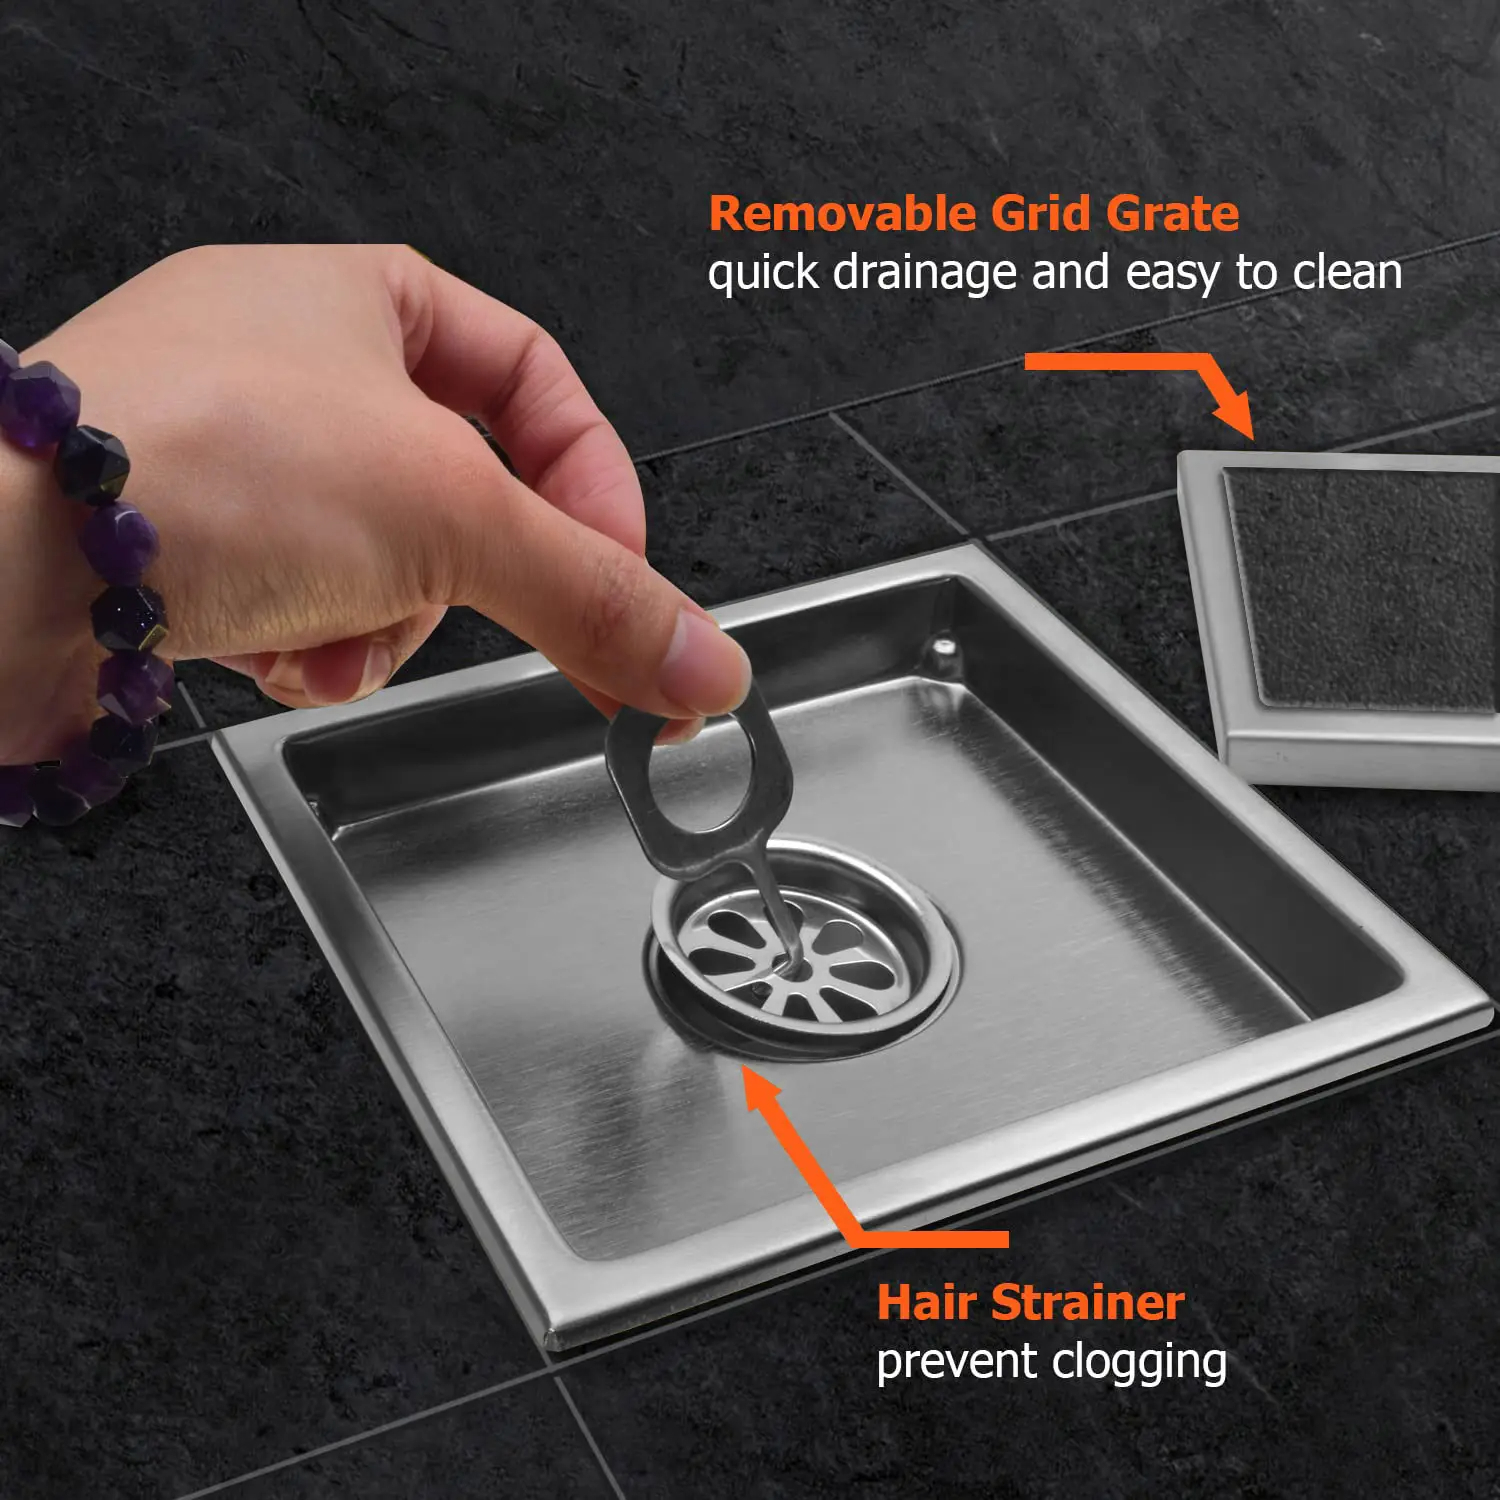 Effective Sewer Backup Prevention: The Importance of Floor Drain Covers